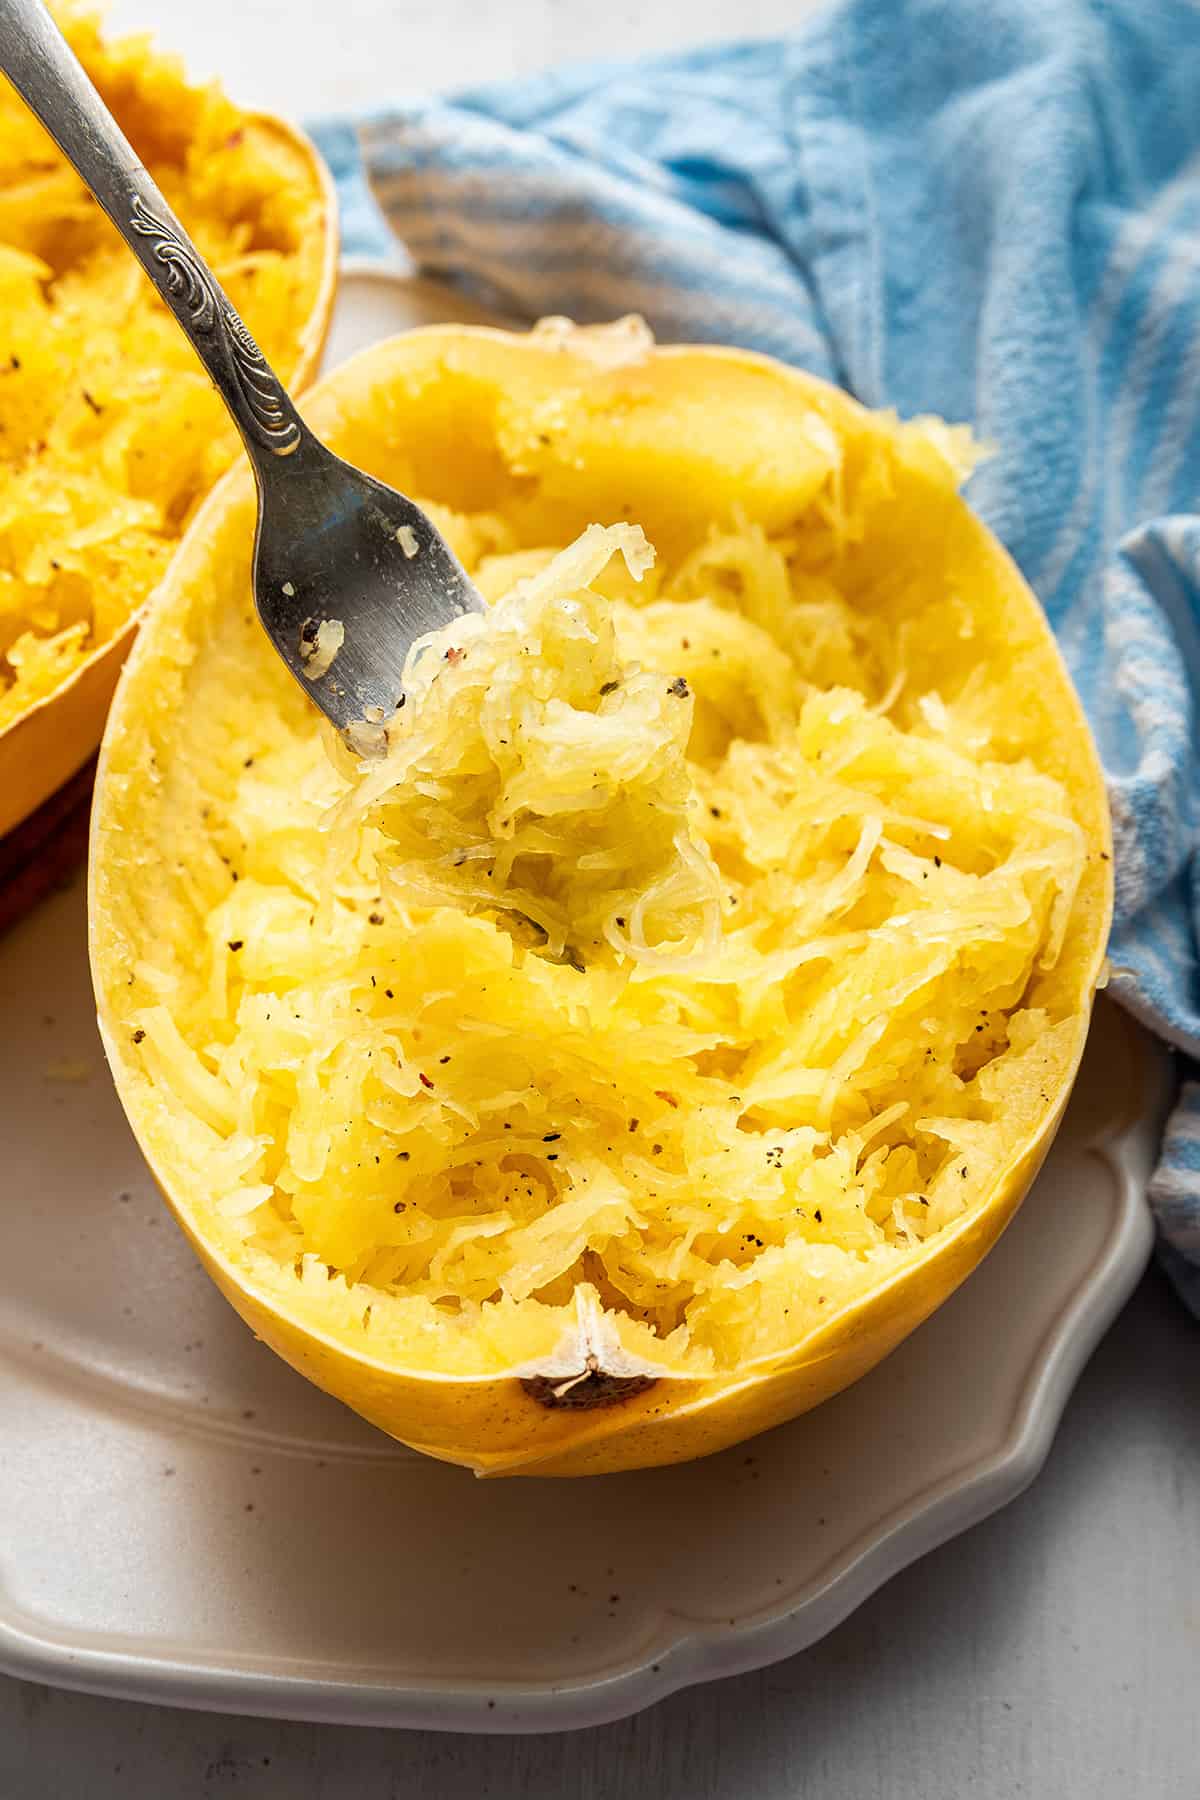 Close up of a half of a cooked spaghetti squash that has been shredded, with a fork sticking out of it